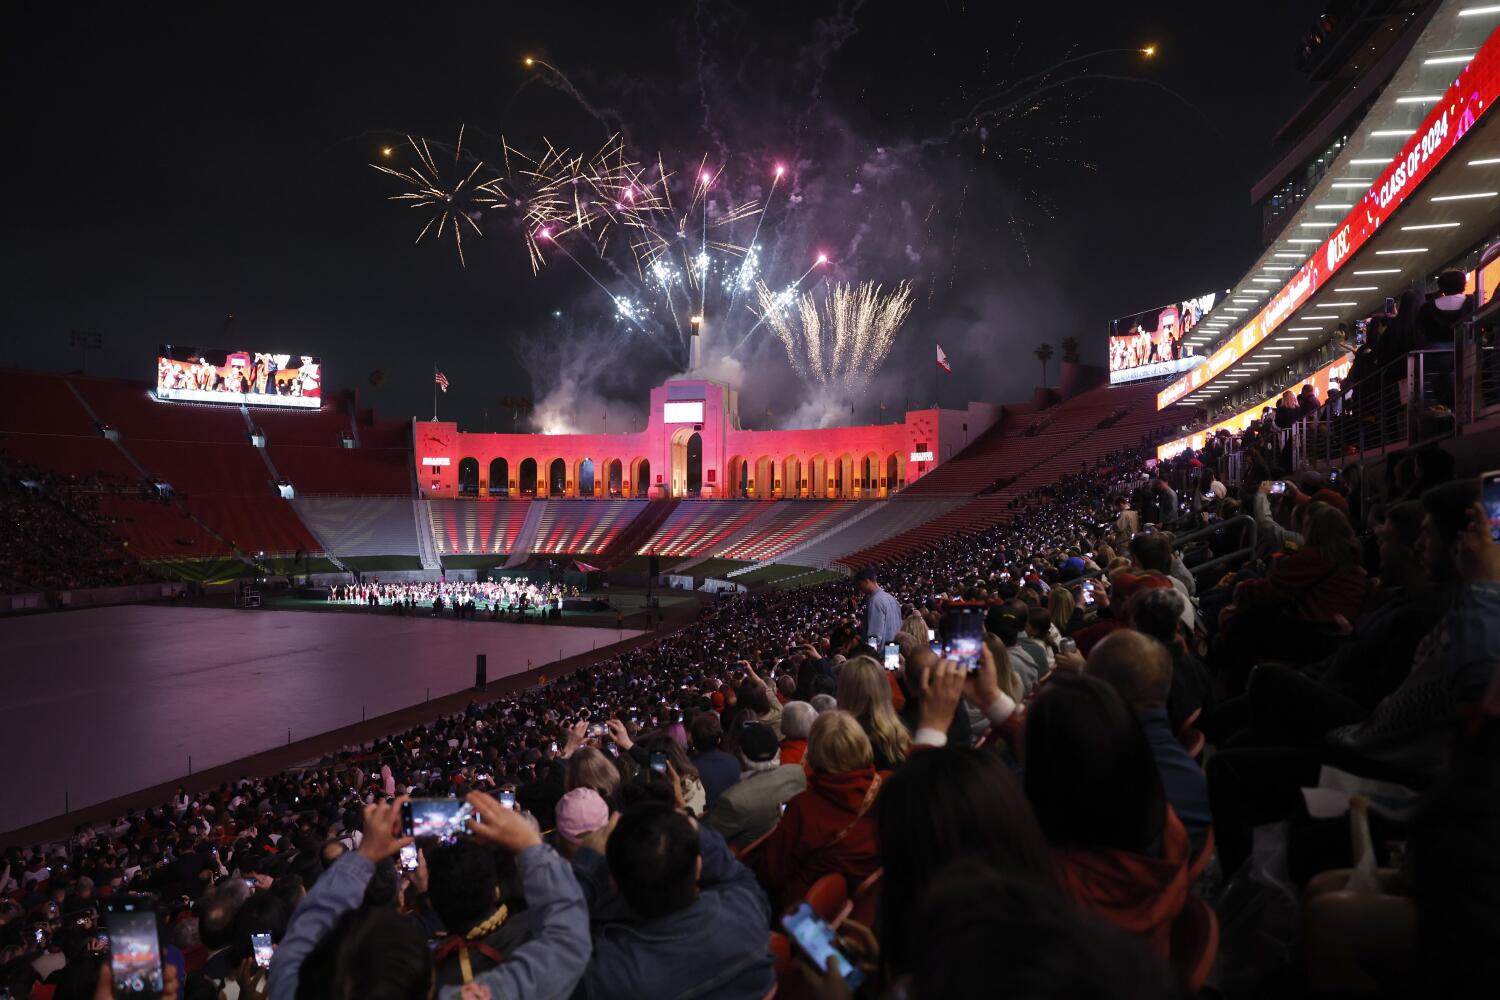 USC graduation unfolds amid tight security and standing ovation for canceled valedictorian